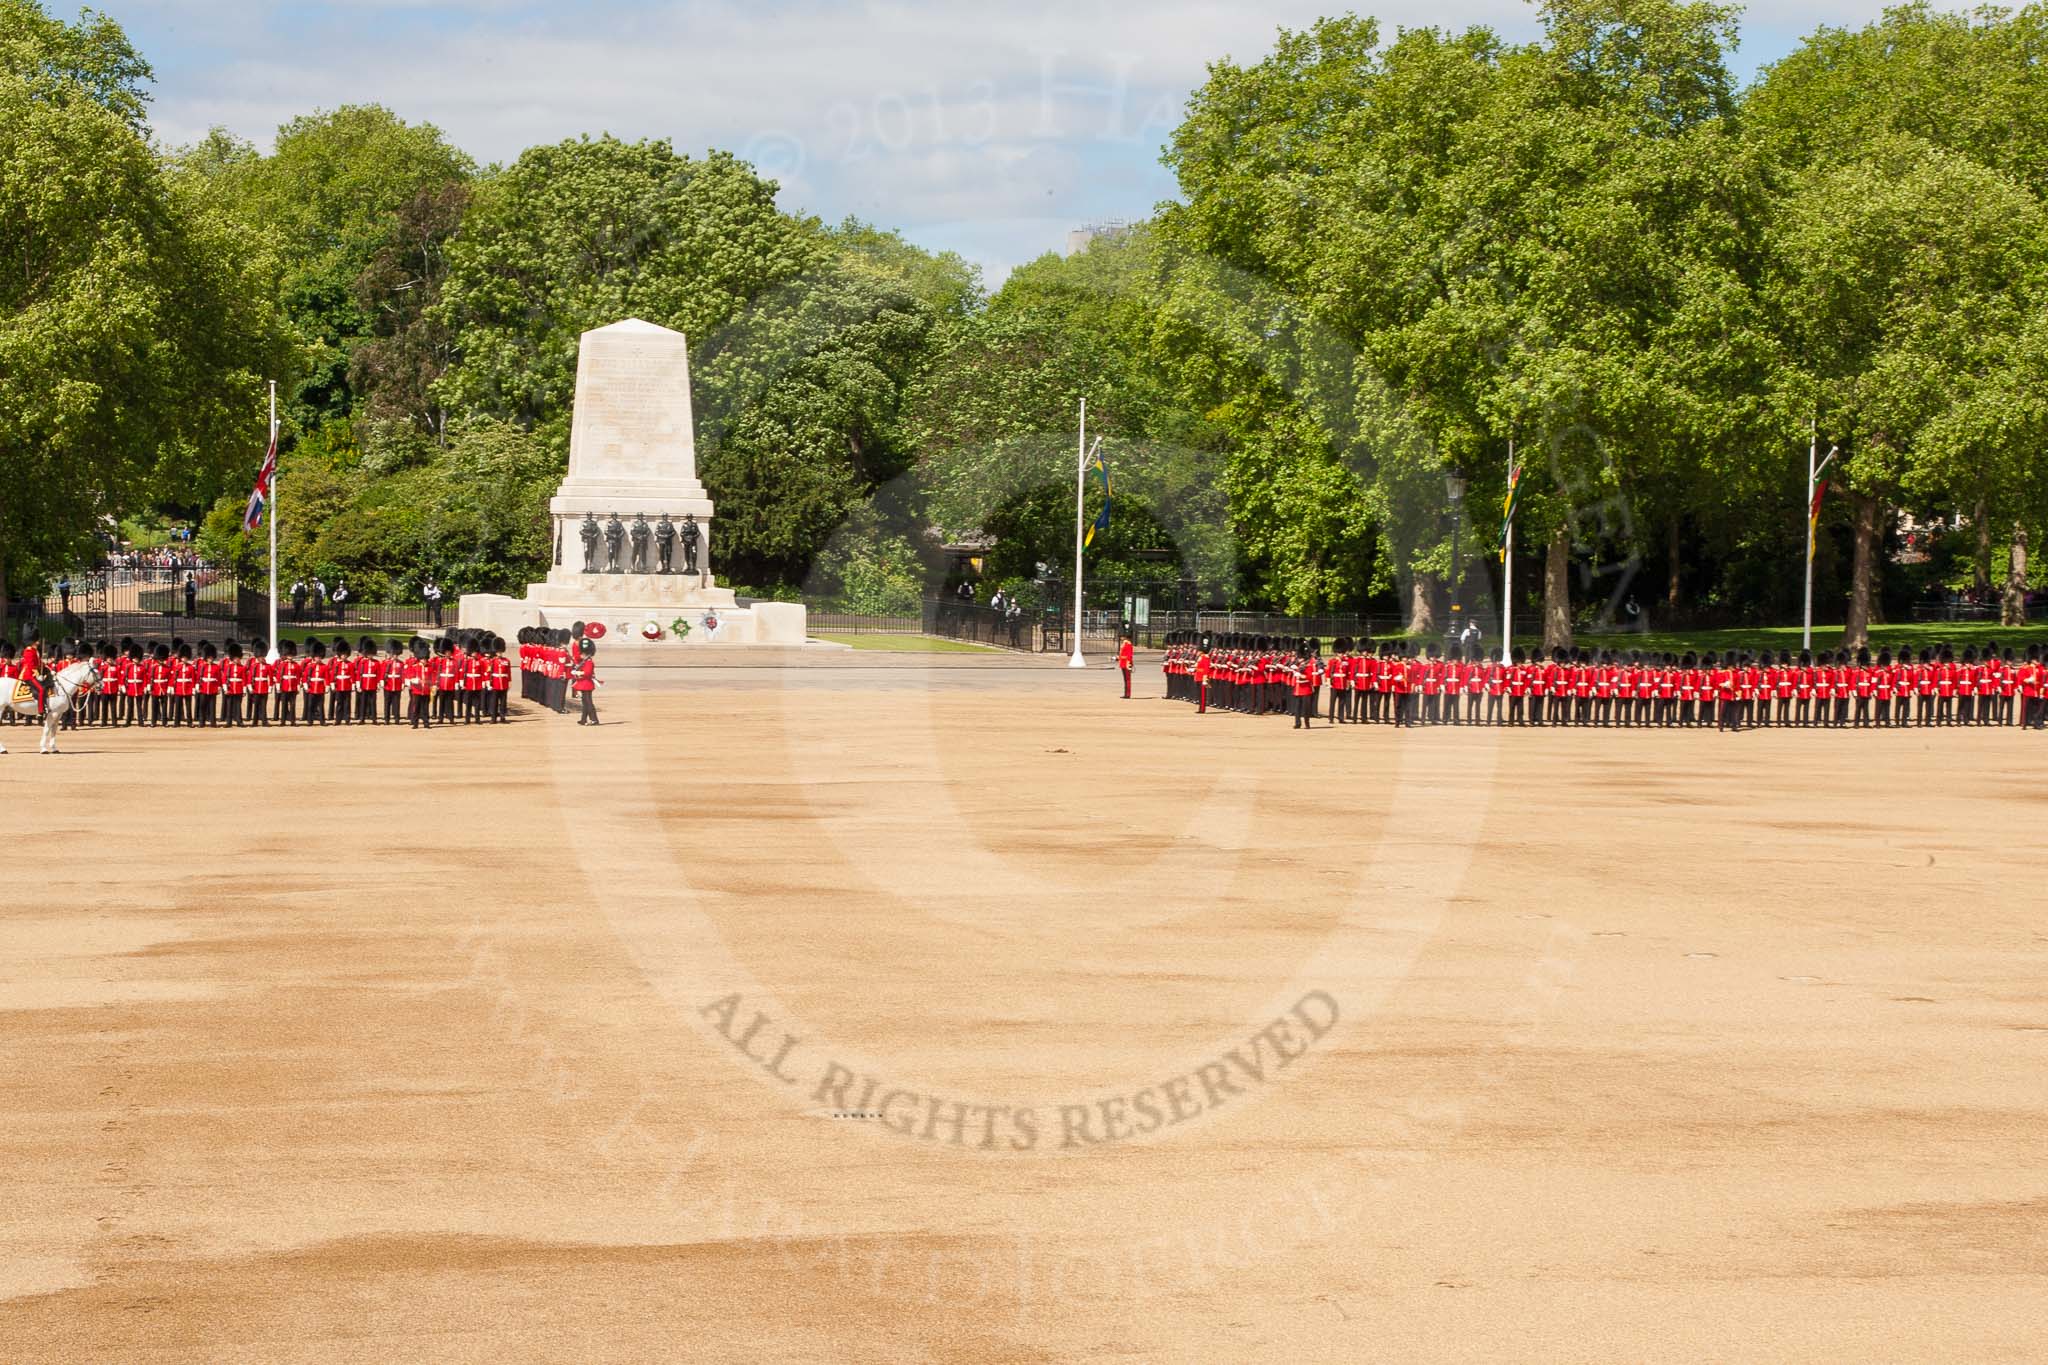 The Colonel's Review 2013: No. 3 Guard, 1st Battalion Welsh Guards, at the gap in the line for members of the Royal Family..
Horse Guards Parade, Westminster,
London SW1,

United Kingdom,
on 08 June 2013 at 10:44, image #210